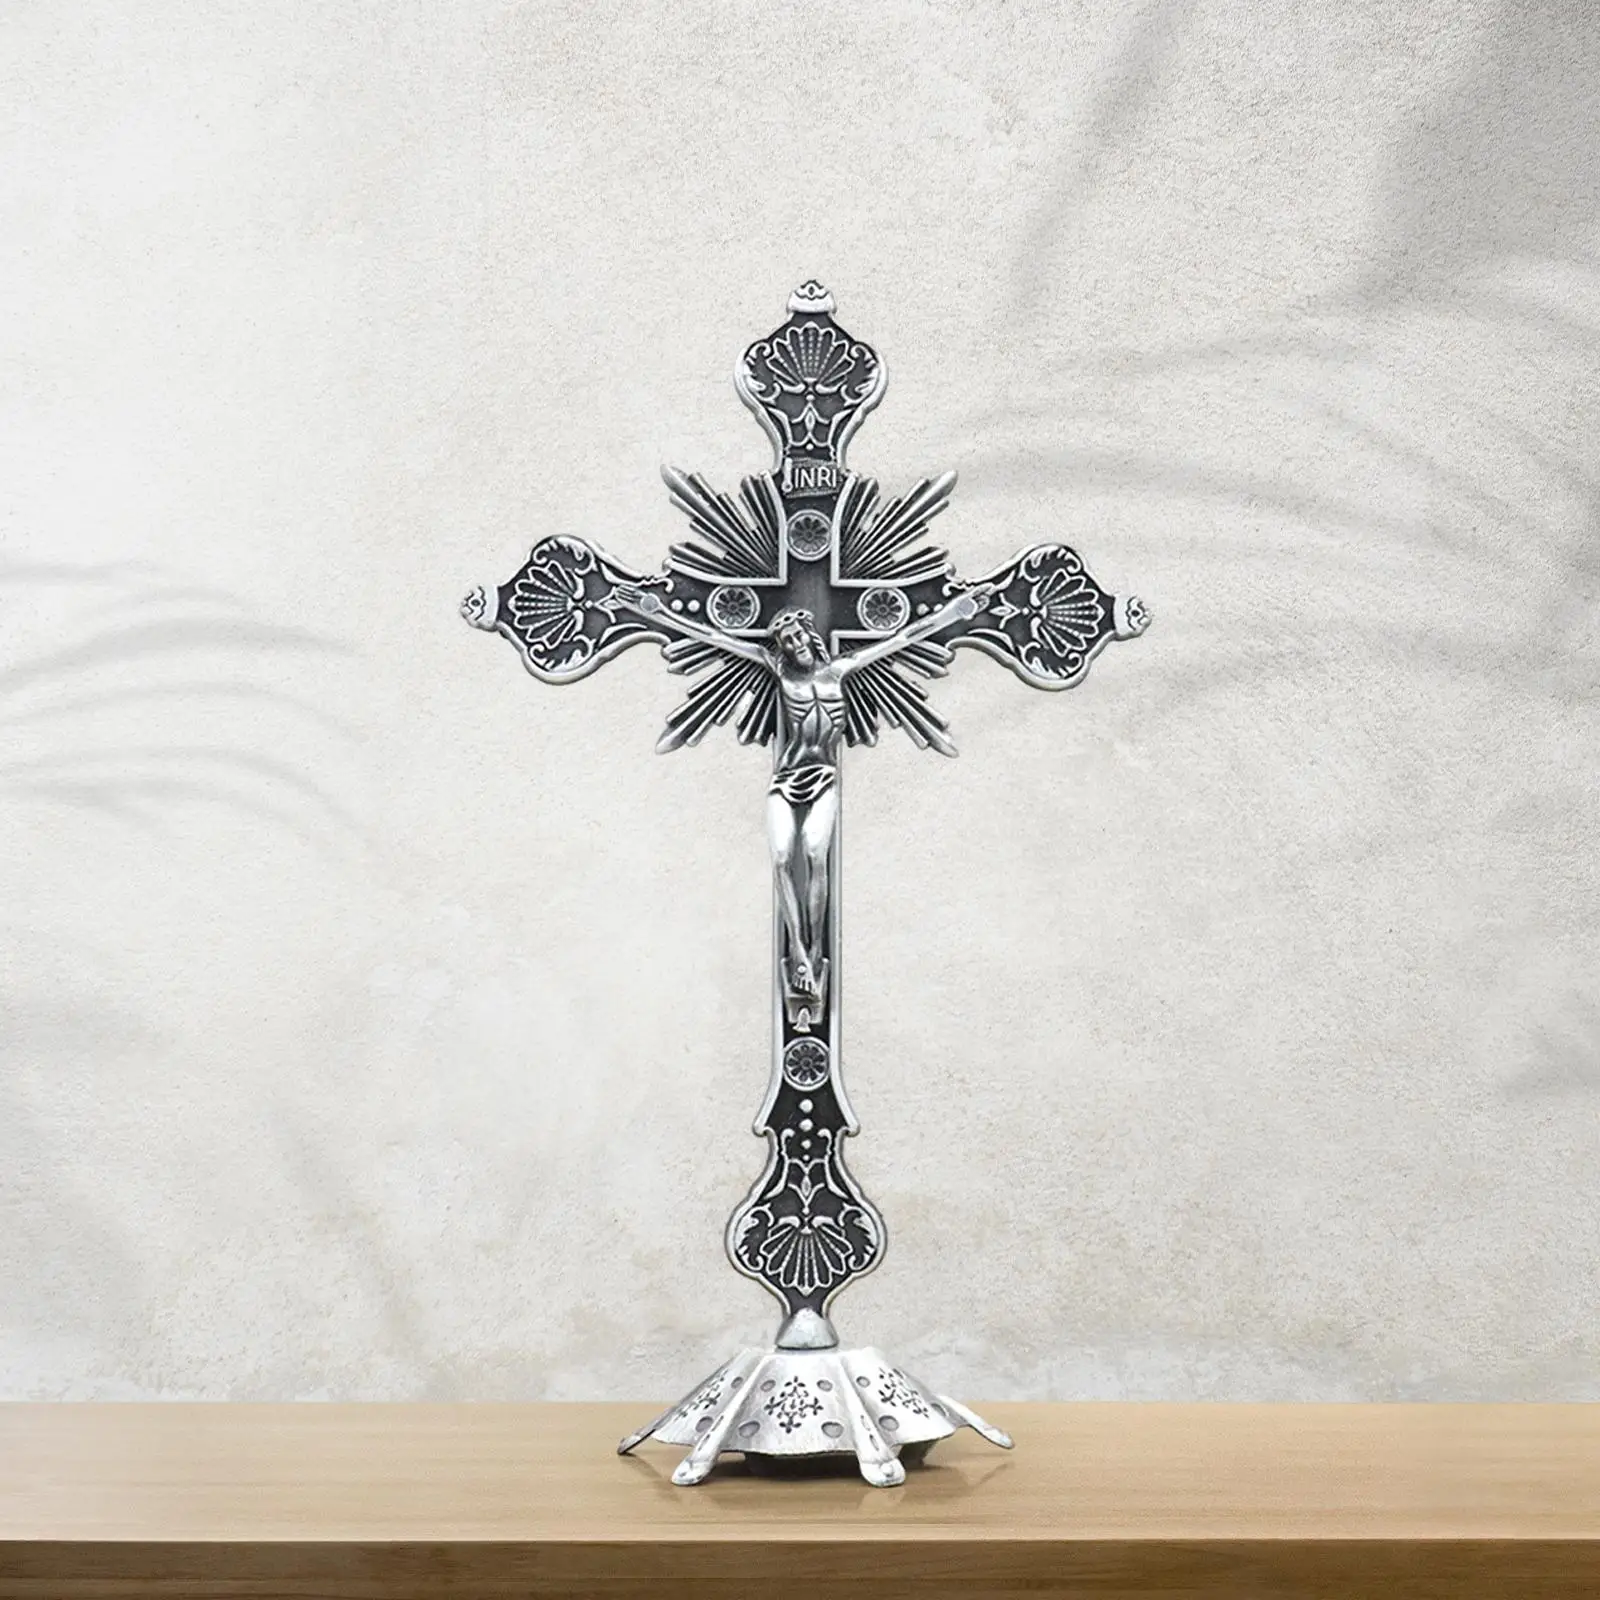 Jesus Crucifix Sculpture Figurine Crucifix with Stand for Prayers Home Table